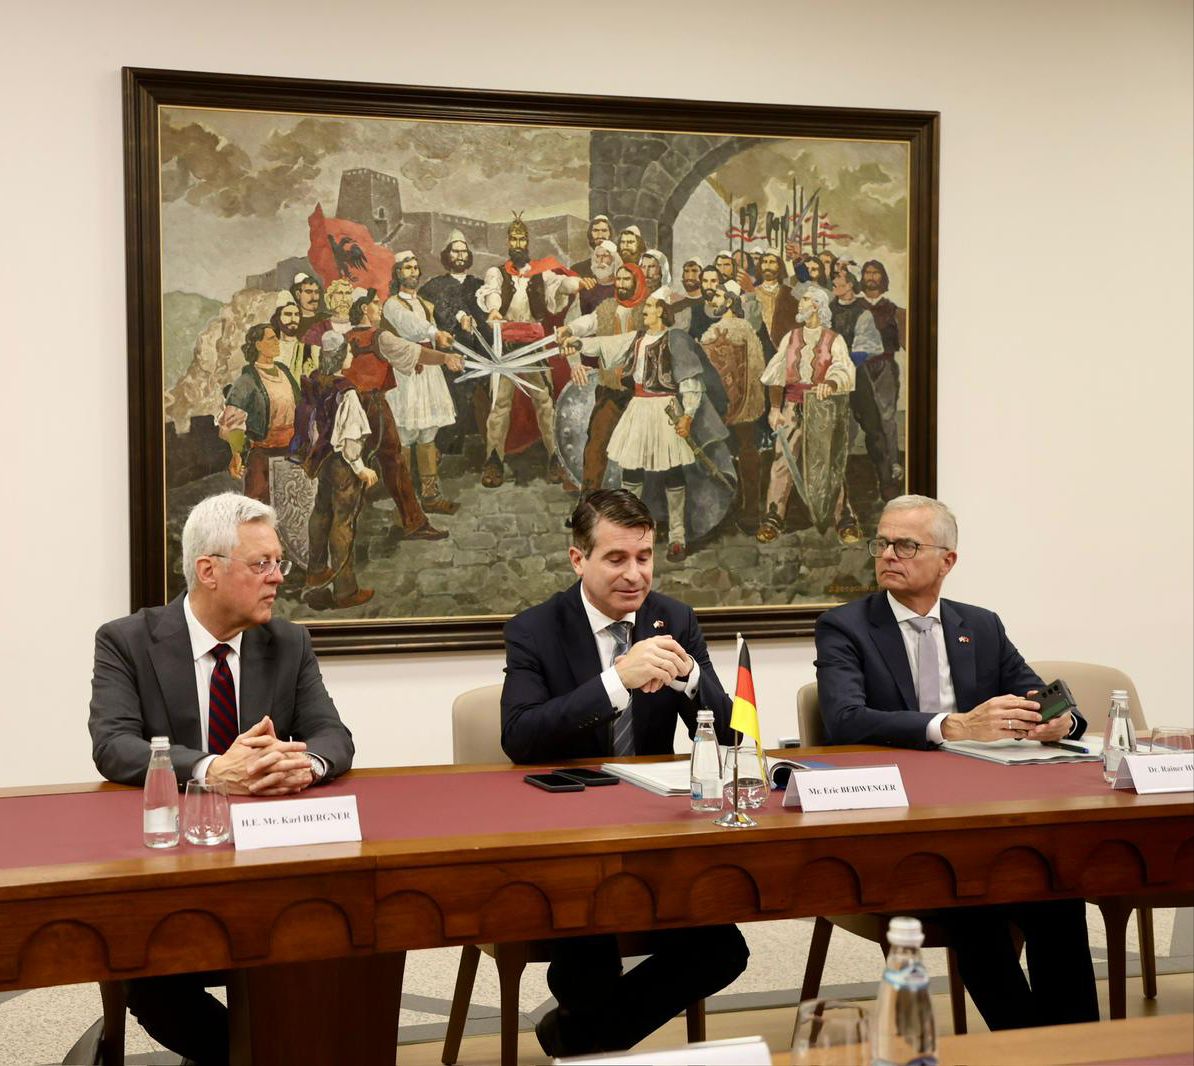 The Minister for Europe and Foreign Affairs, @IgliHasani, welcomed today the Minister of State for European and International Affairs of Bavaria,𝐄𝐫𝐢𝐜 𝐁𝐞𝐢ß𝐰𝐞𝐧𝐠𝐞𝐫. The ministers emphasized the excellent bilateral ties and cooperation between #Albania and #Germany, and